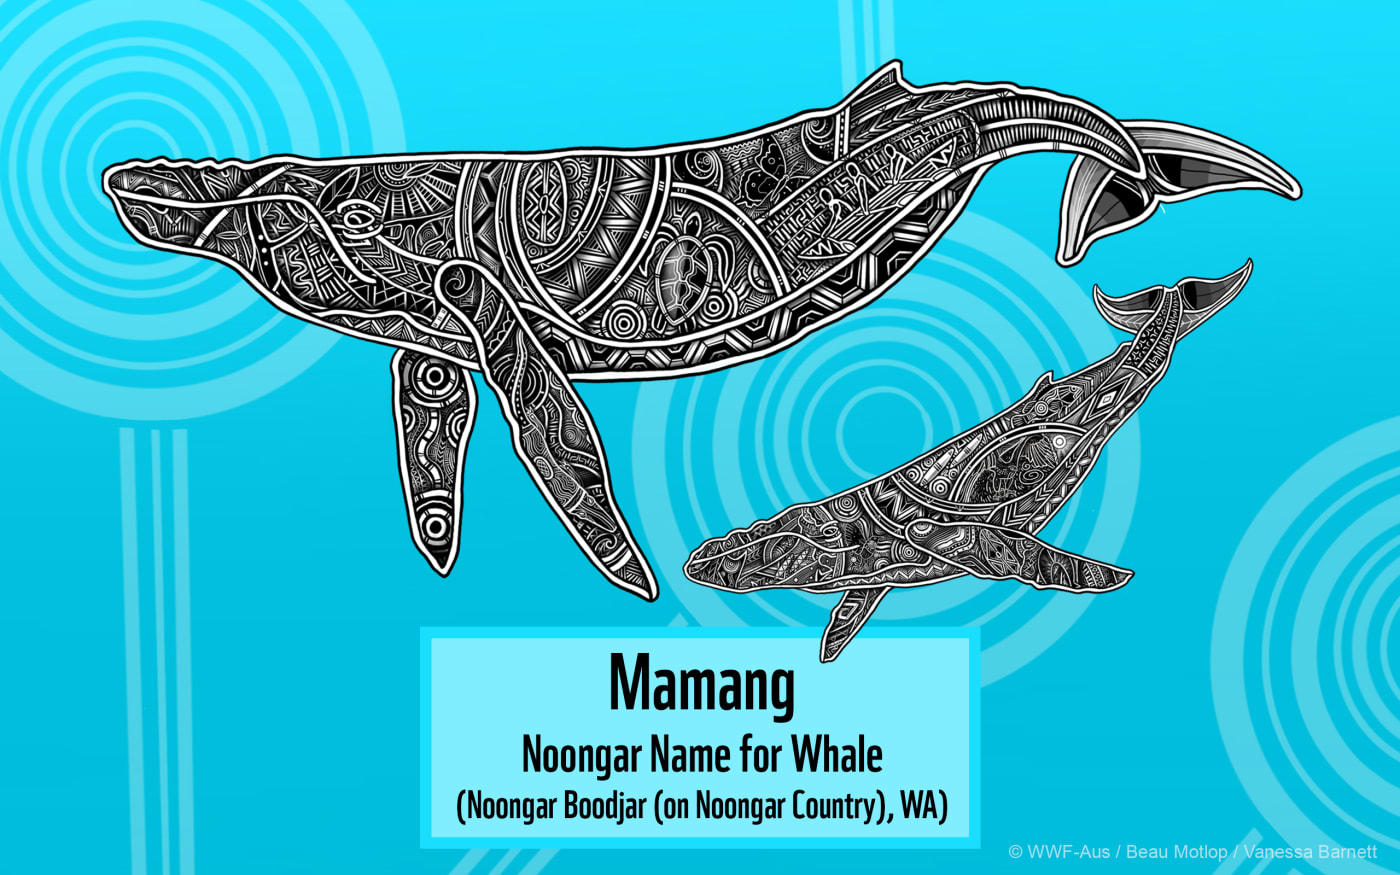 Indigenous Whale or Mamang Mother and Calf Art Desktop featuring Noongar Name for Whale (2560x1600)